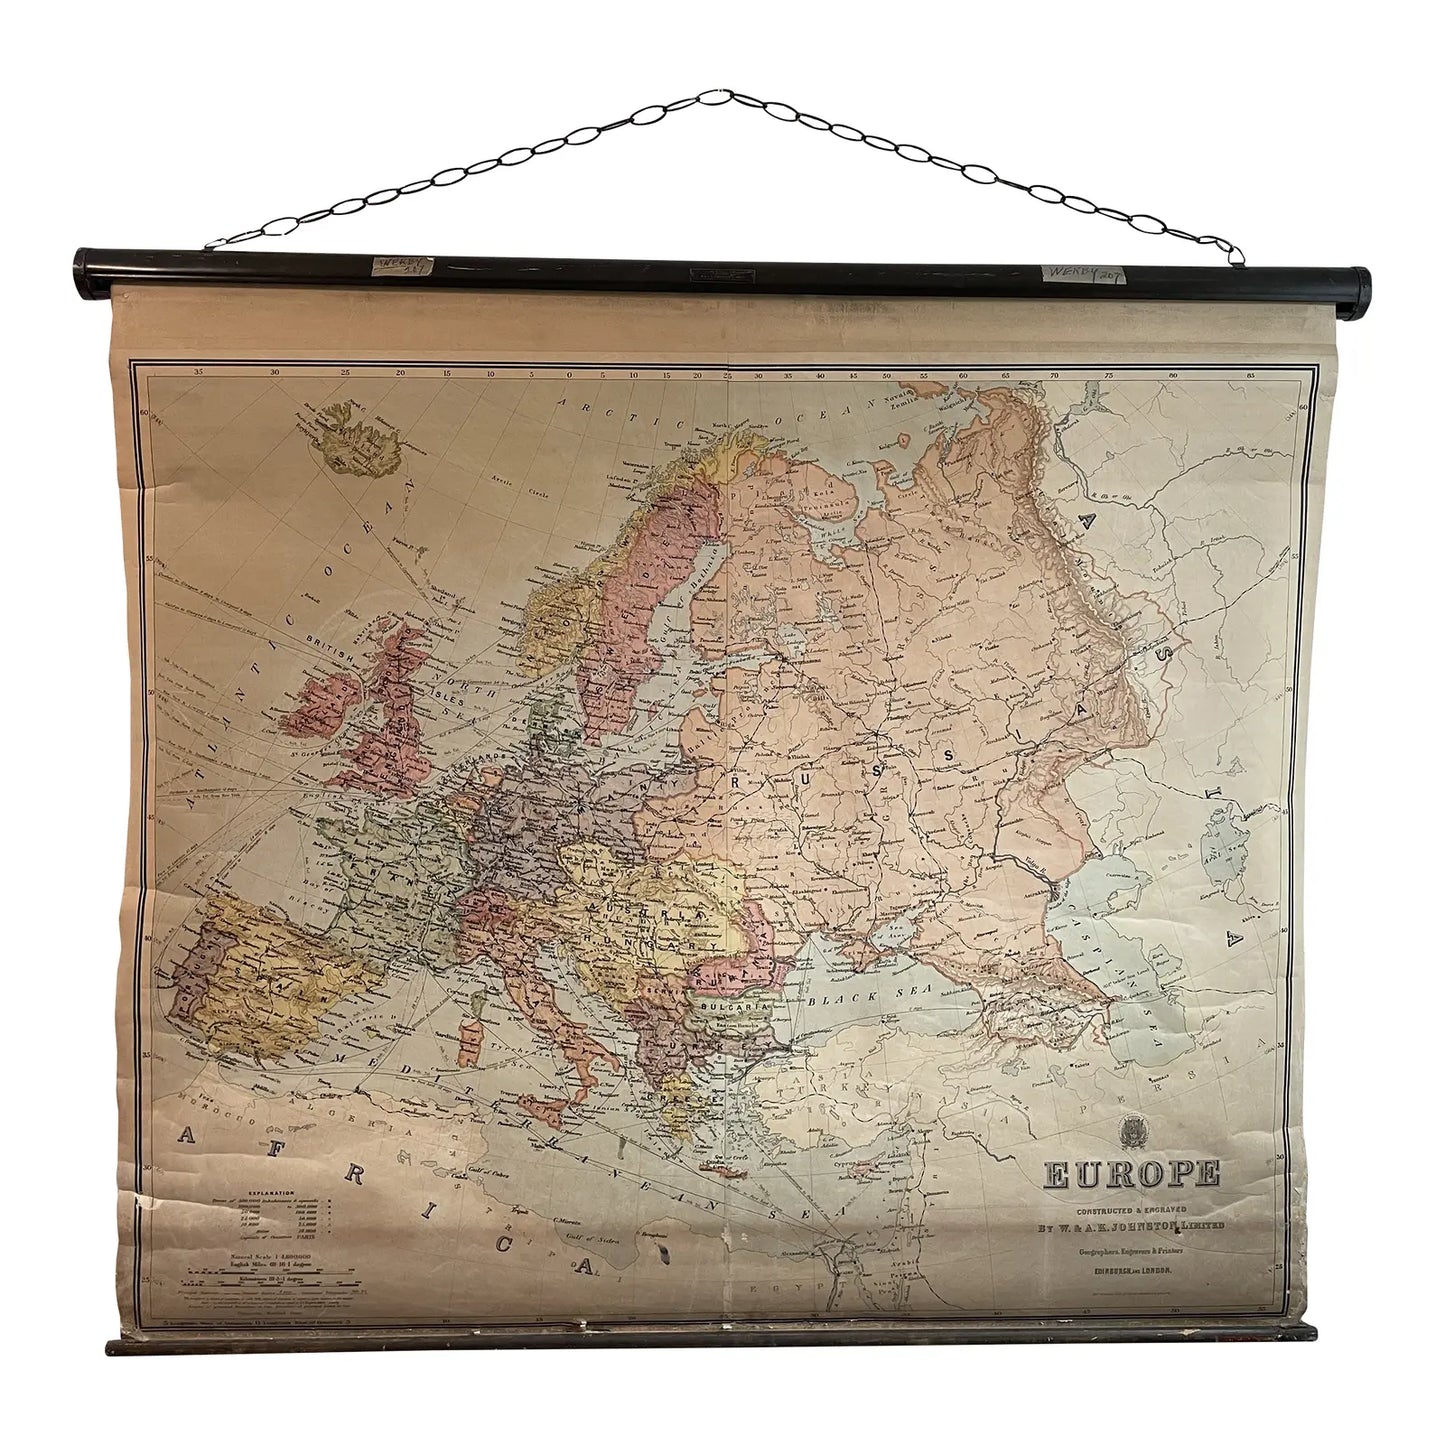 Antique Map of Europe Constructed & Engraved by W. & a.k. Johnston, Limited 1898